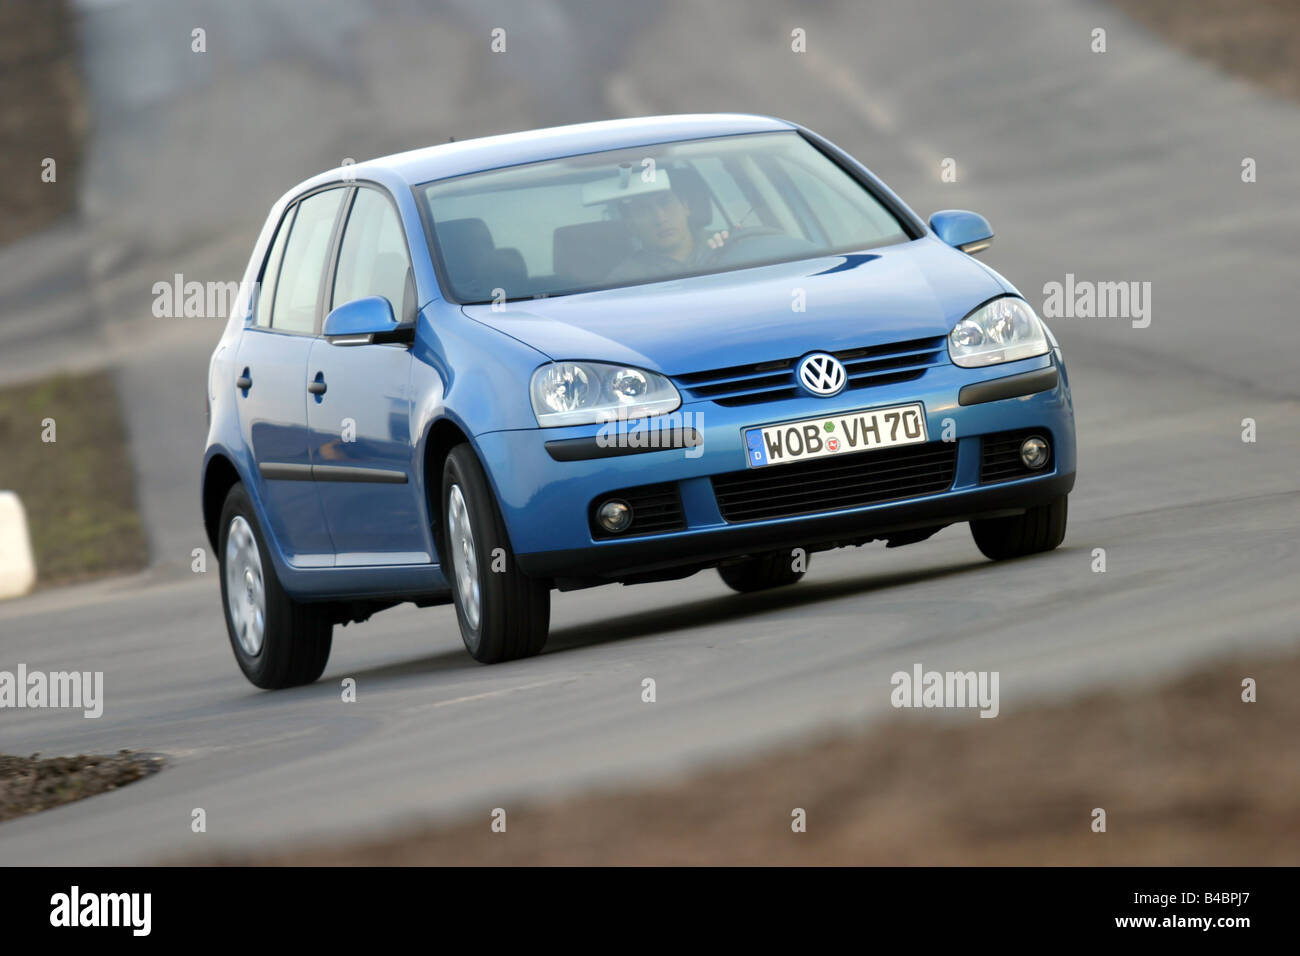 Car, VW Volkswagen Golf V 1.4 Trend, Lower middle-sized class, model year  2003-, metallic-blue, Limousine, FGAH, driving, diagon Stock Photo - Alamy